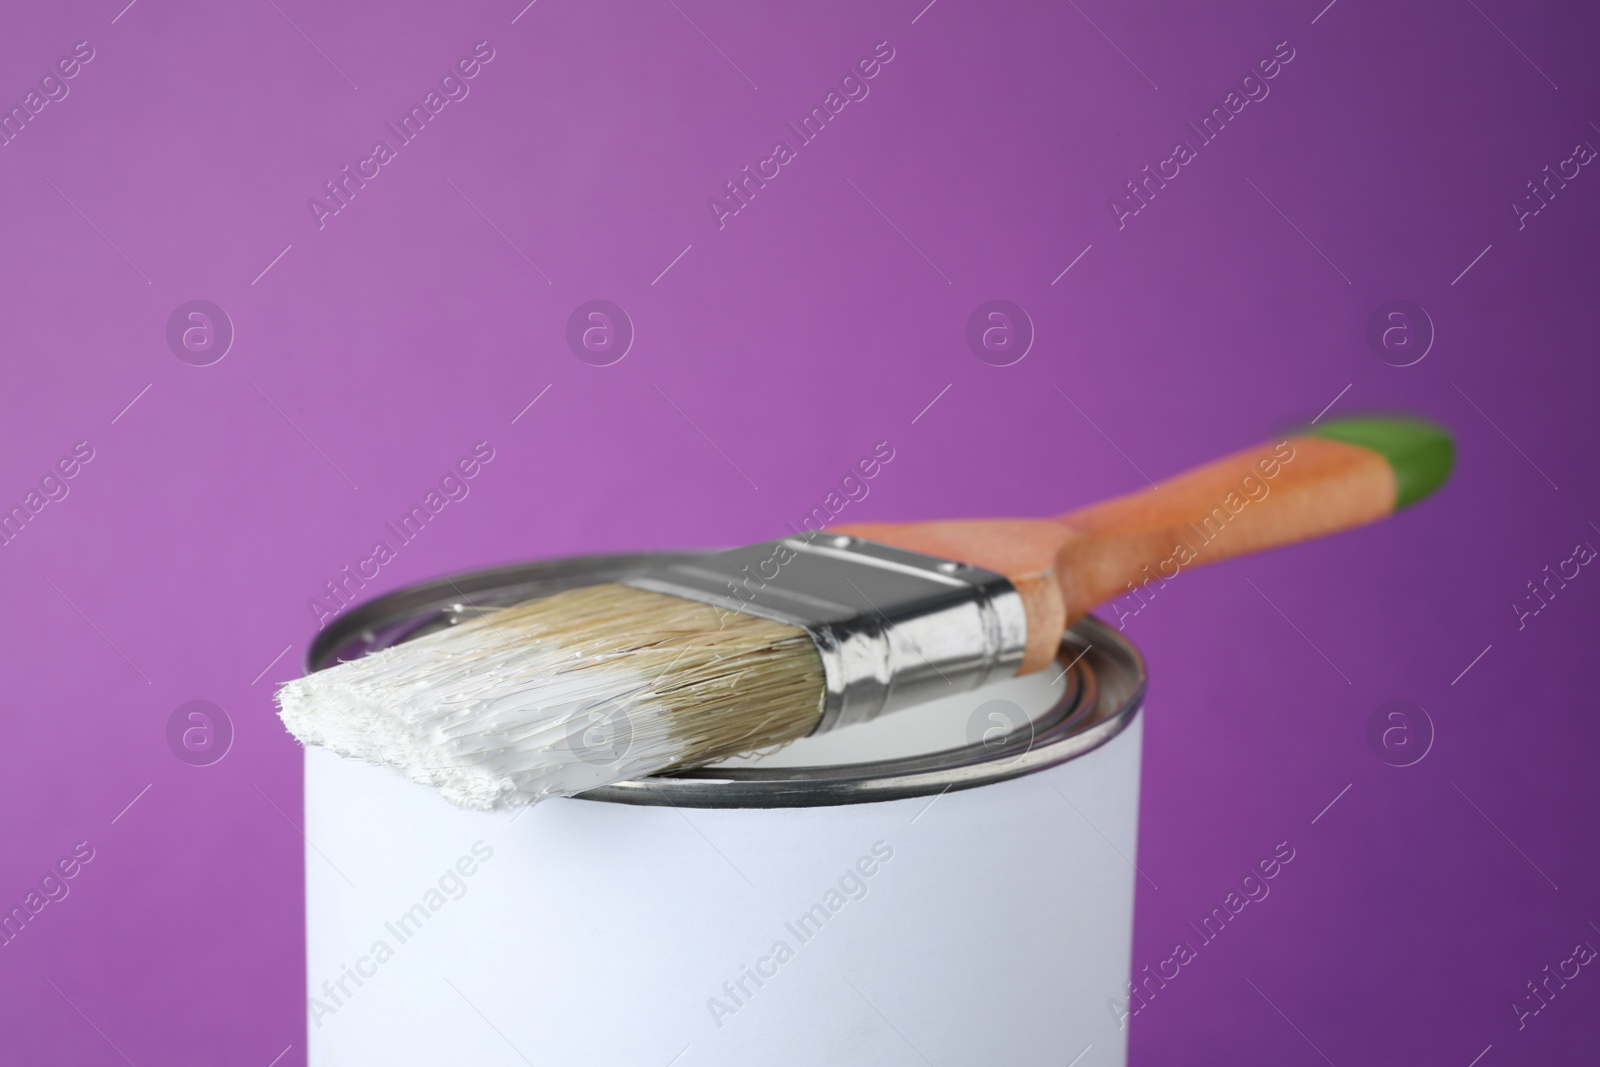 Photo of Can of white paint with brush on purple background